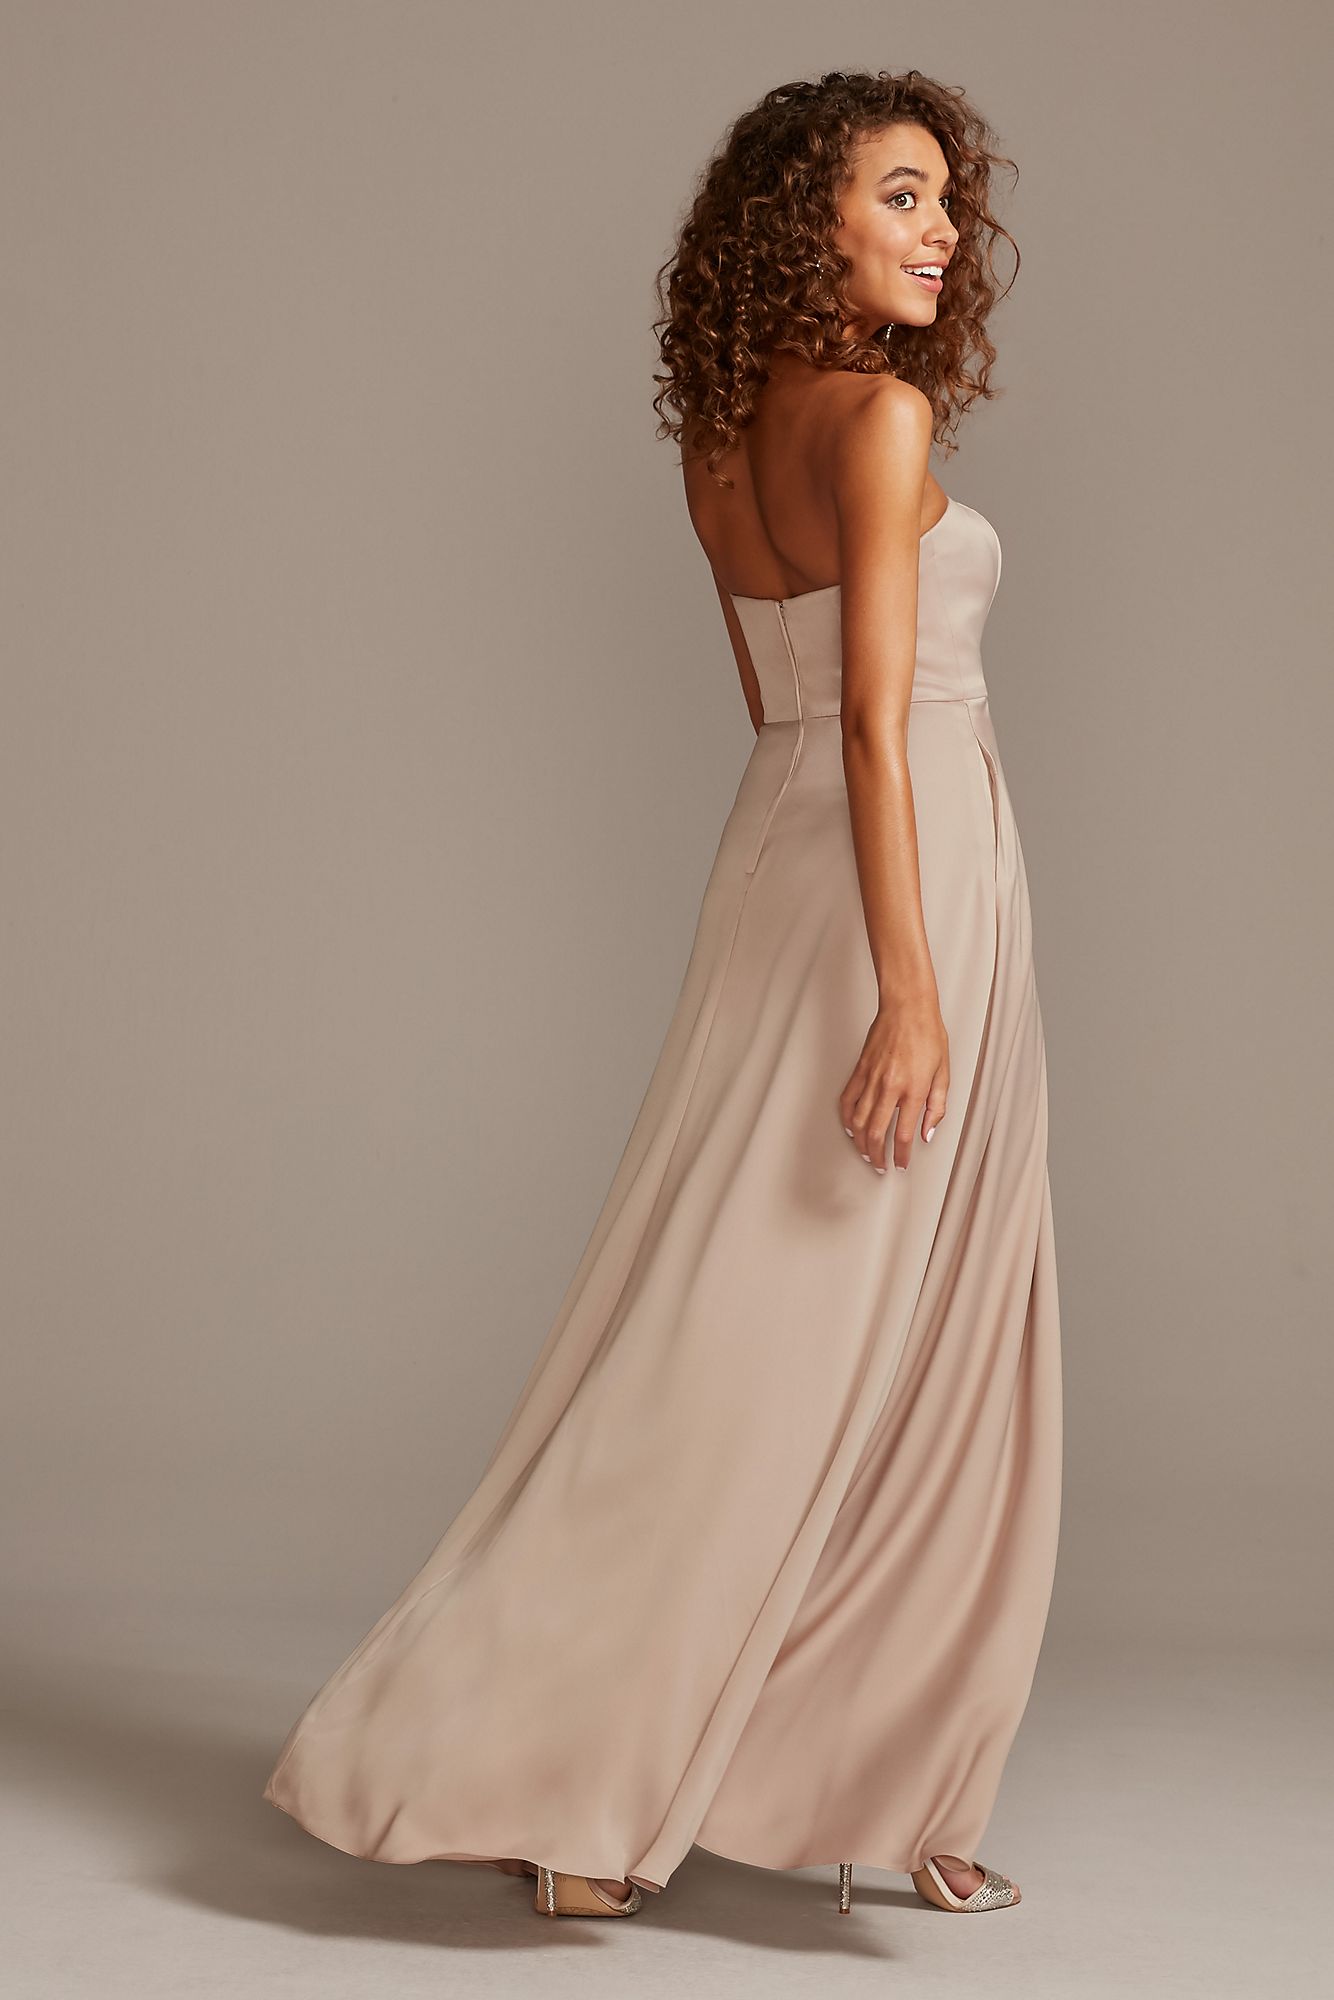 Strapless Long Satin F20097 Syle Bridesmaid Gown with Pockets